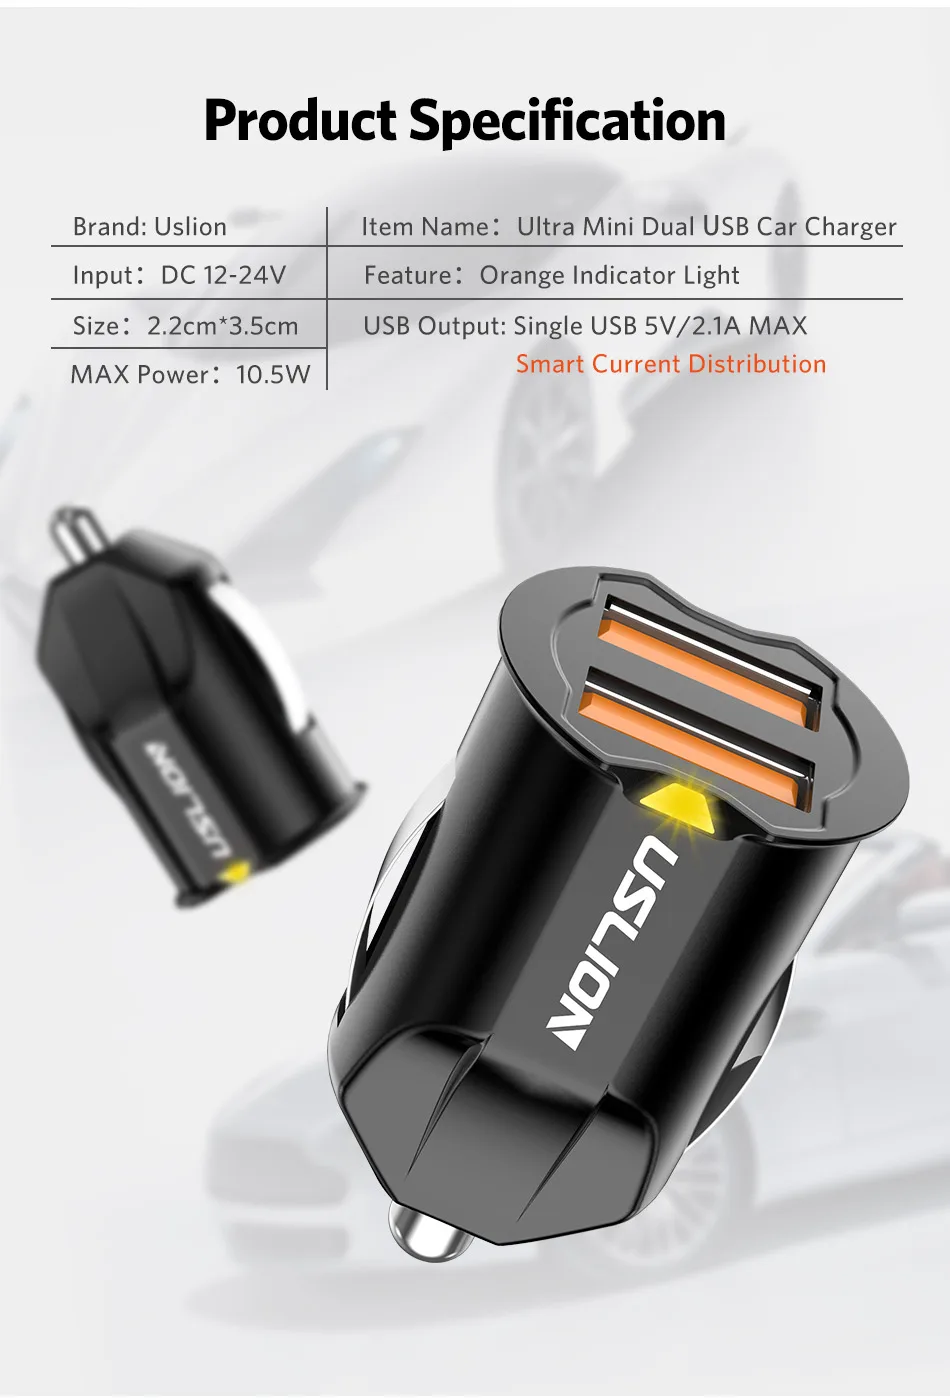 USLION Mini USB Car Charger Adapter 2.1A Car USB Charger Mobile Phone Dual USB Car-charger Auto Charge 2 port for iPhone Samsung car type c charger